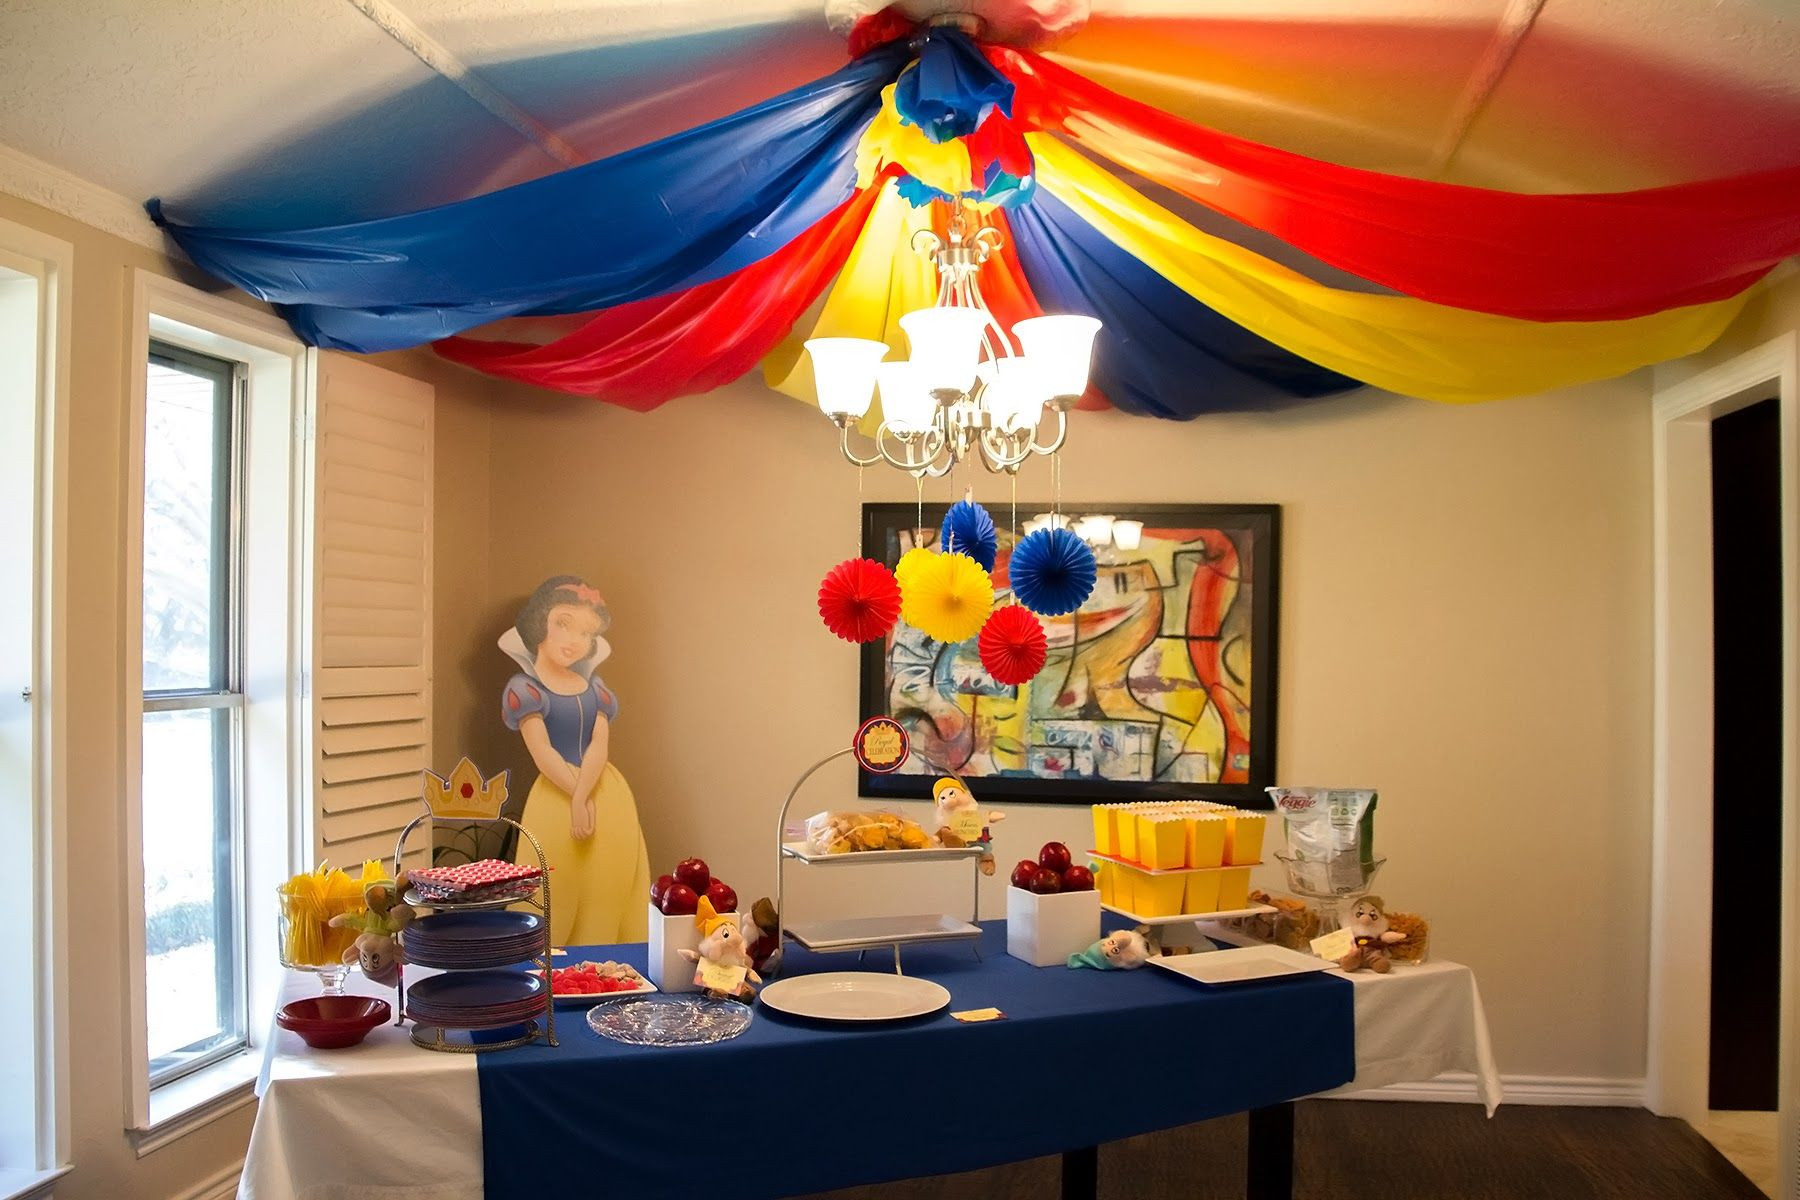 Snow White Birthday Decorations
 Snow White themed first birthday party